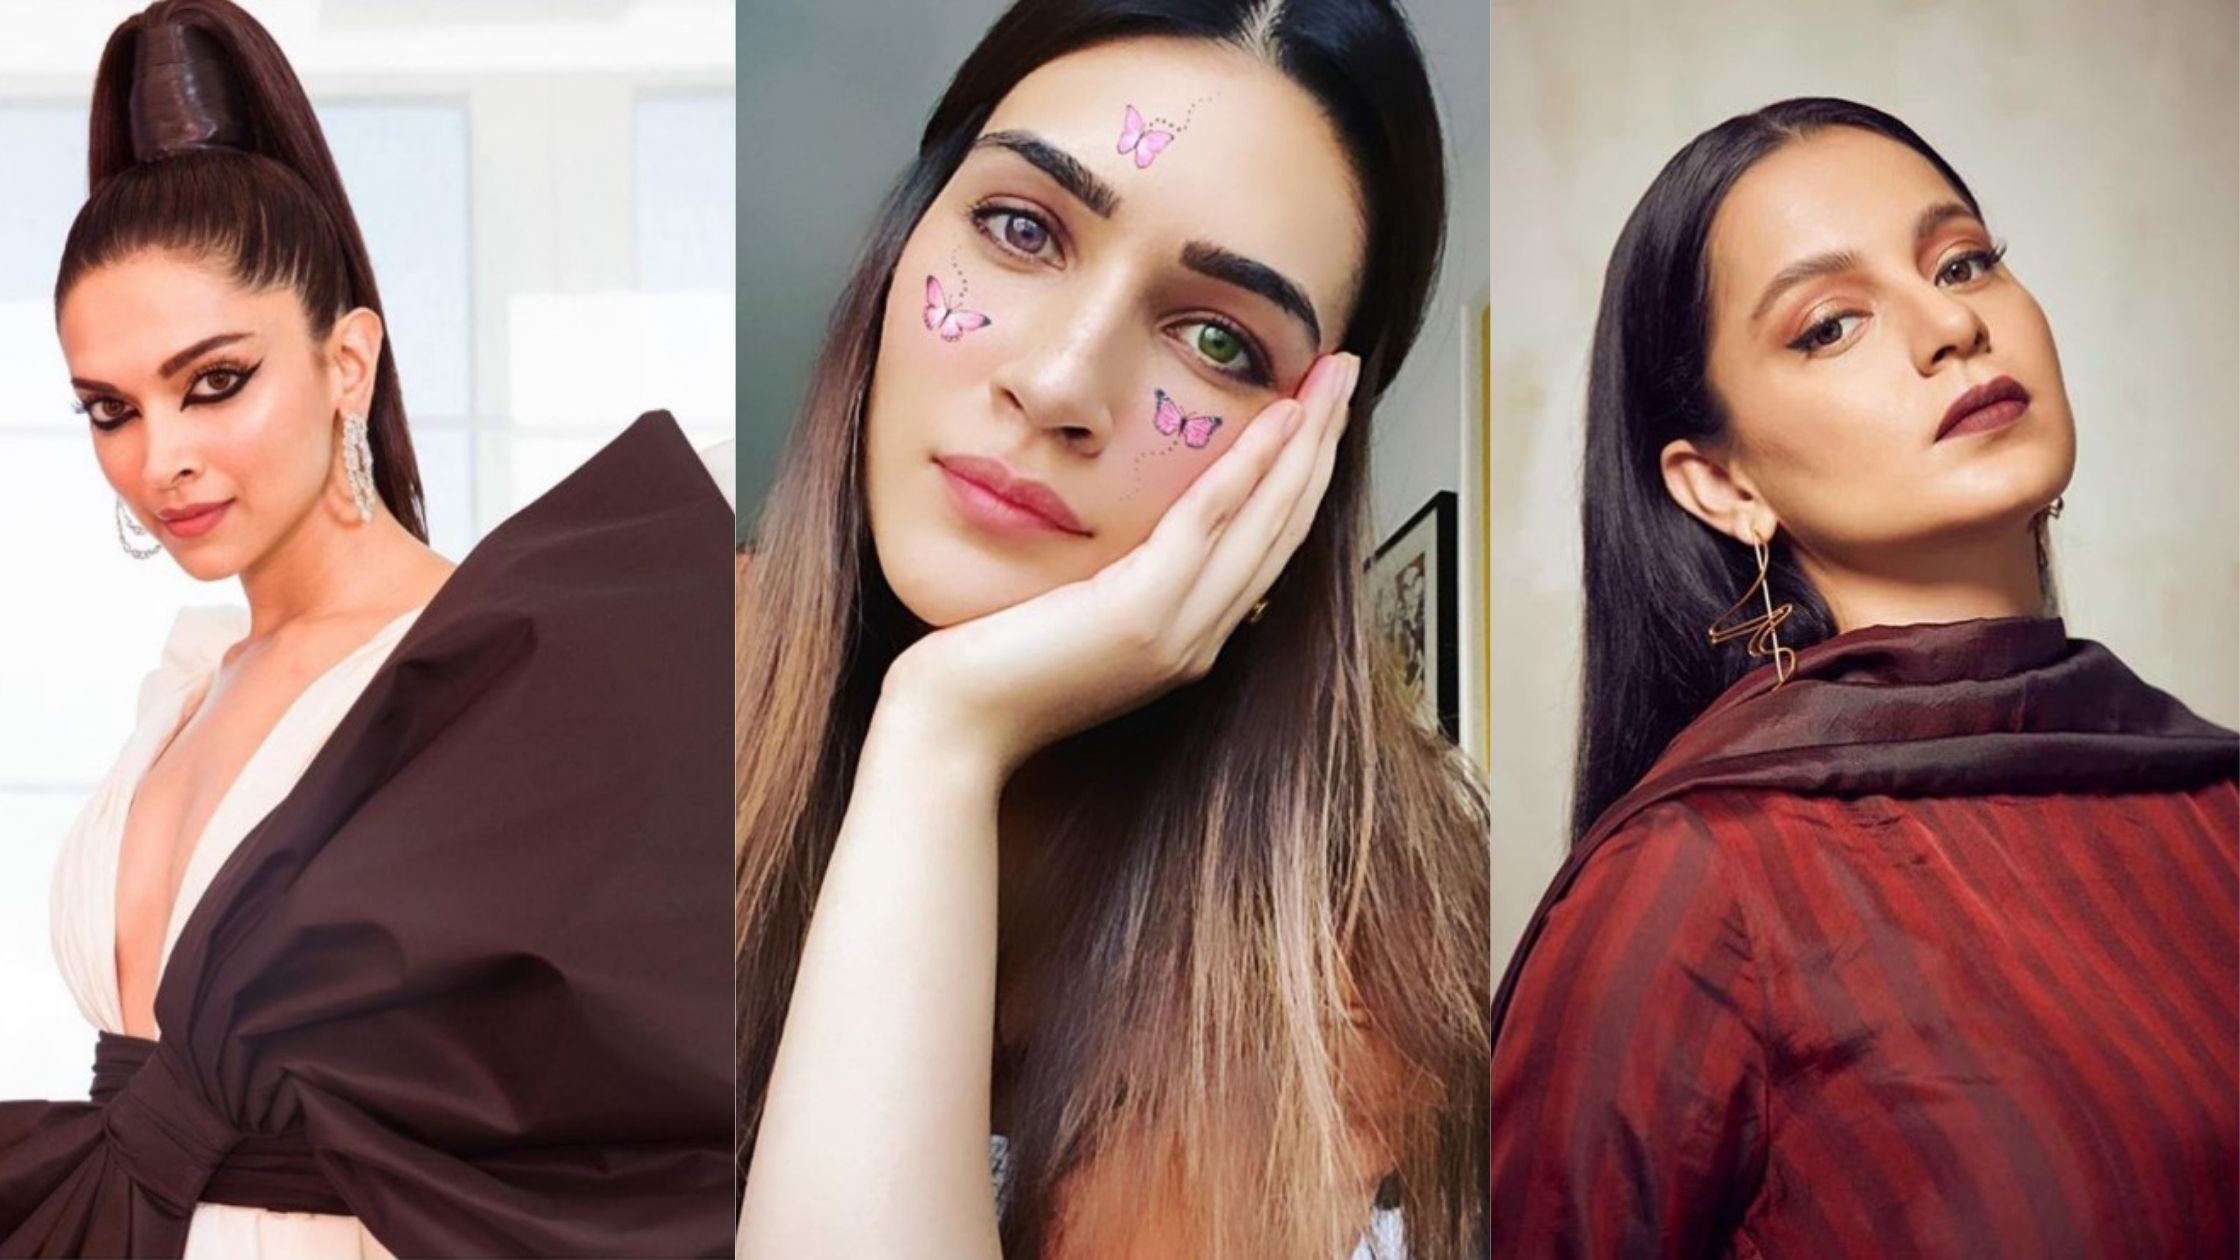 6 celebrity-inspired makeup ideas to try this festive season